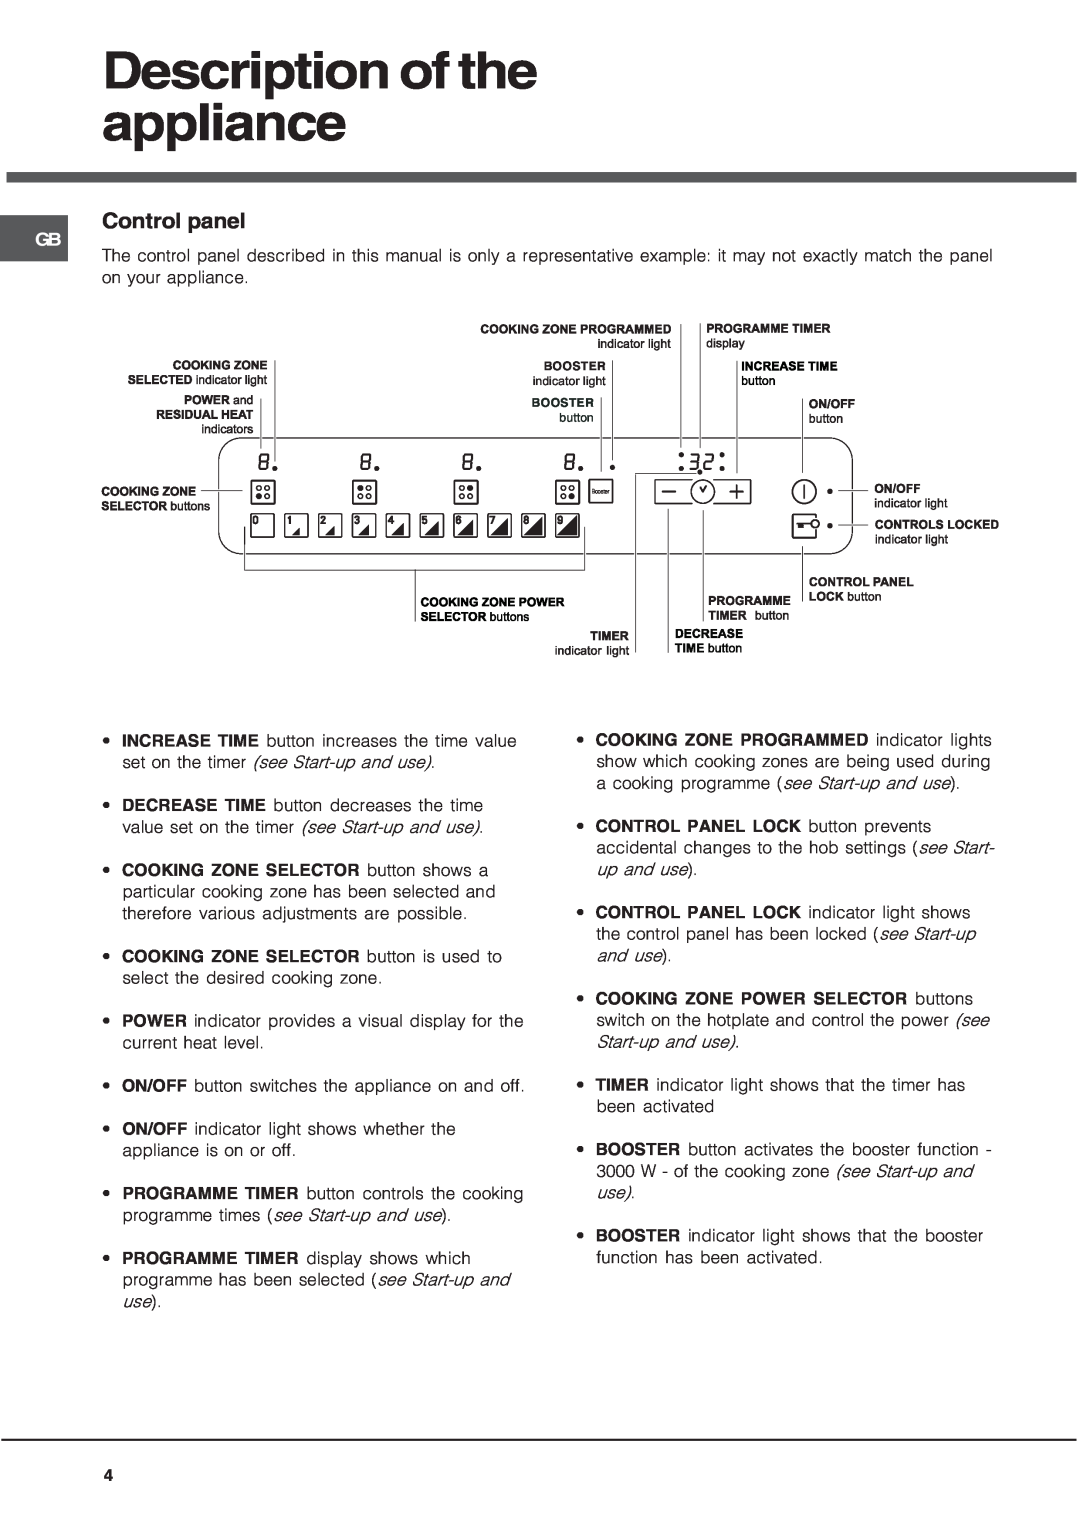 Hotpoint CEO 647 Z manual Description of the appliance, Control panel 